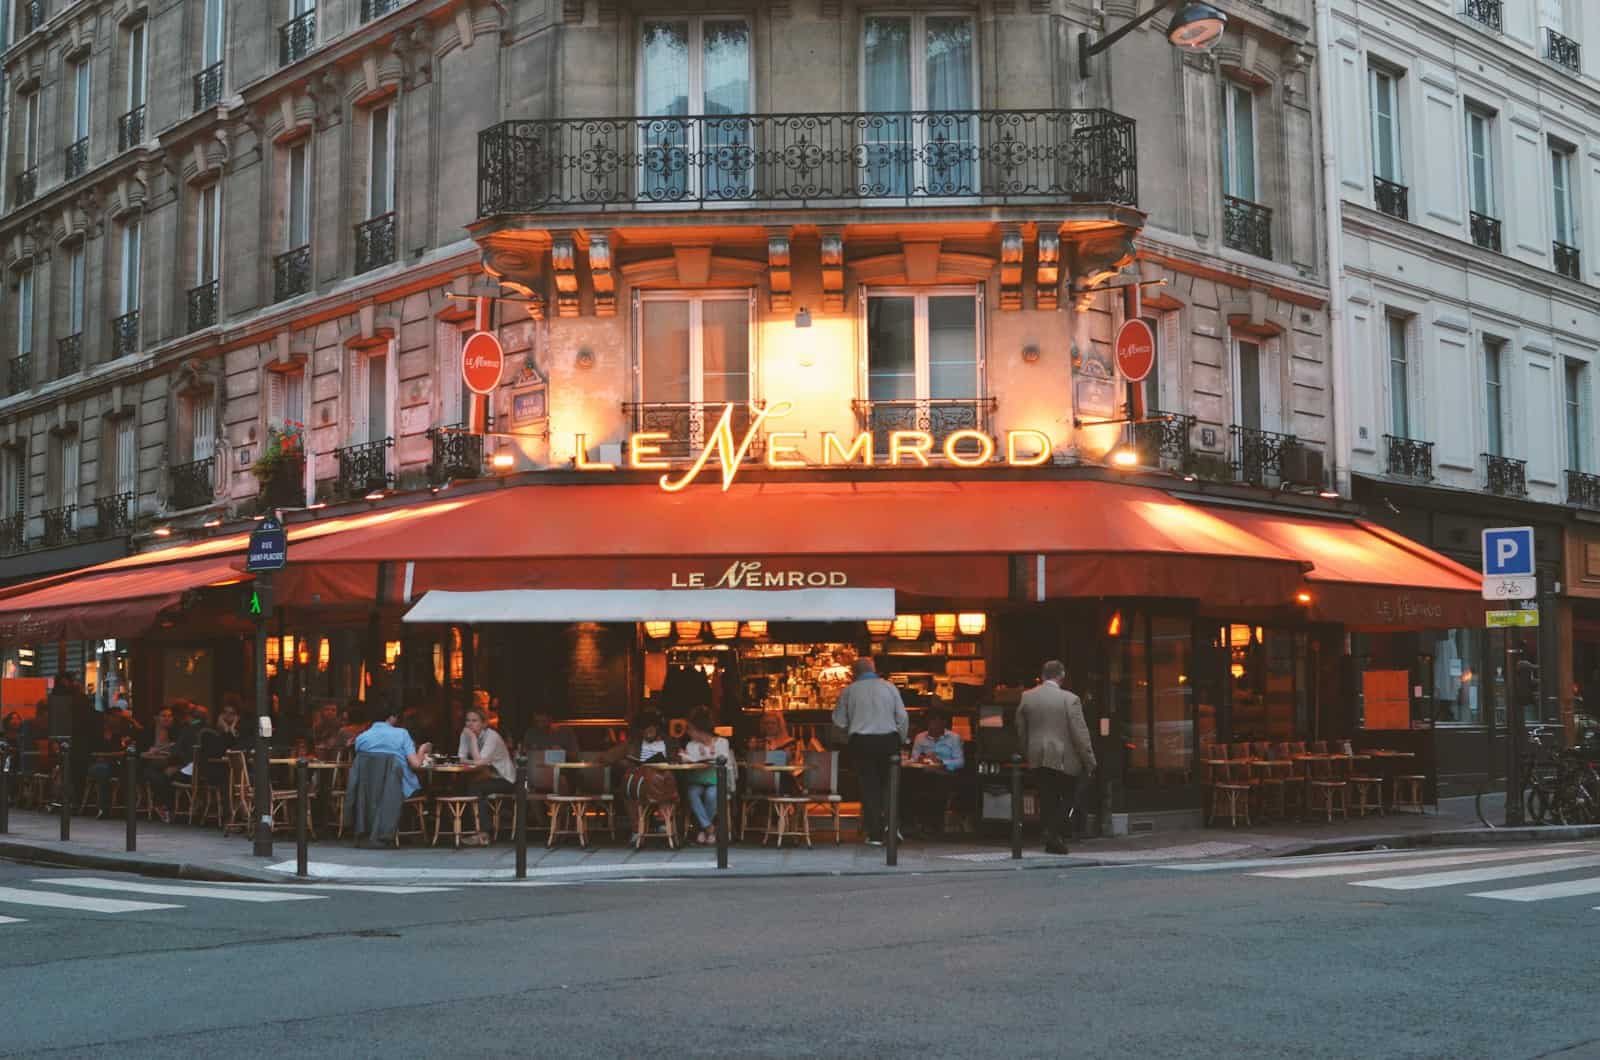 The facade of Le Memrod restaurant at sunset.